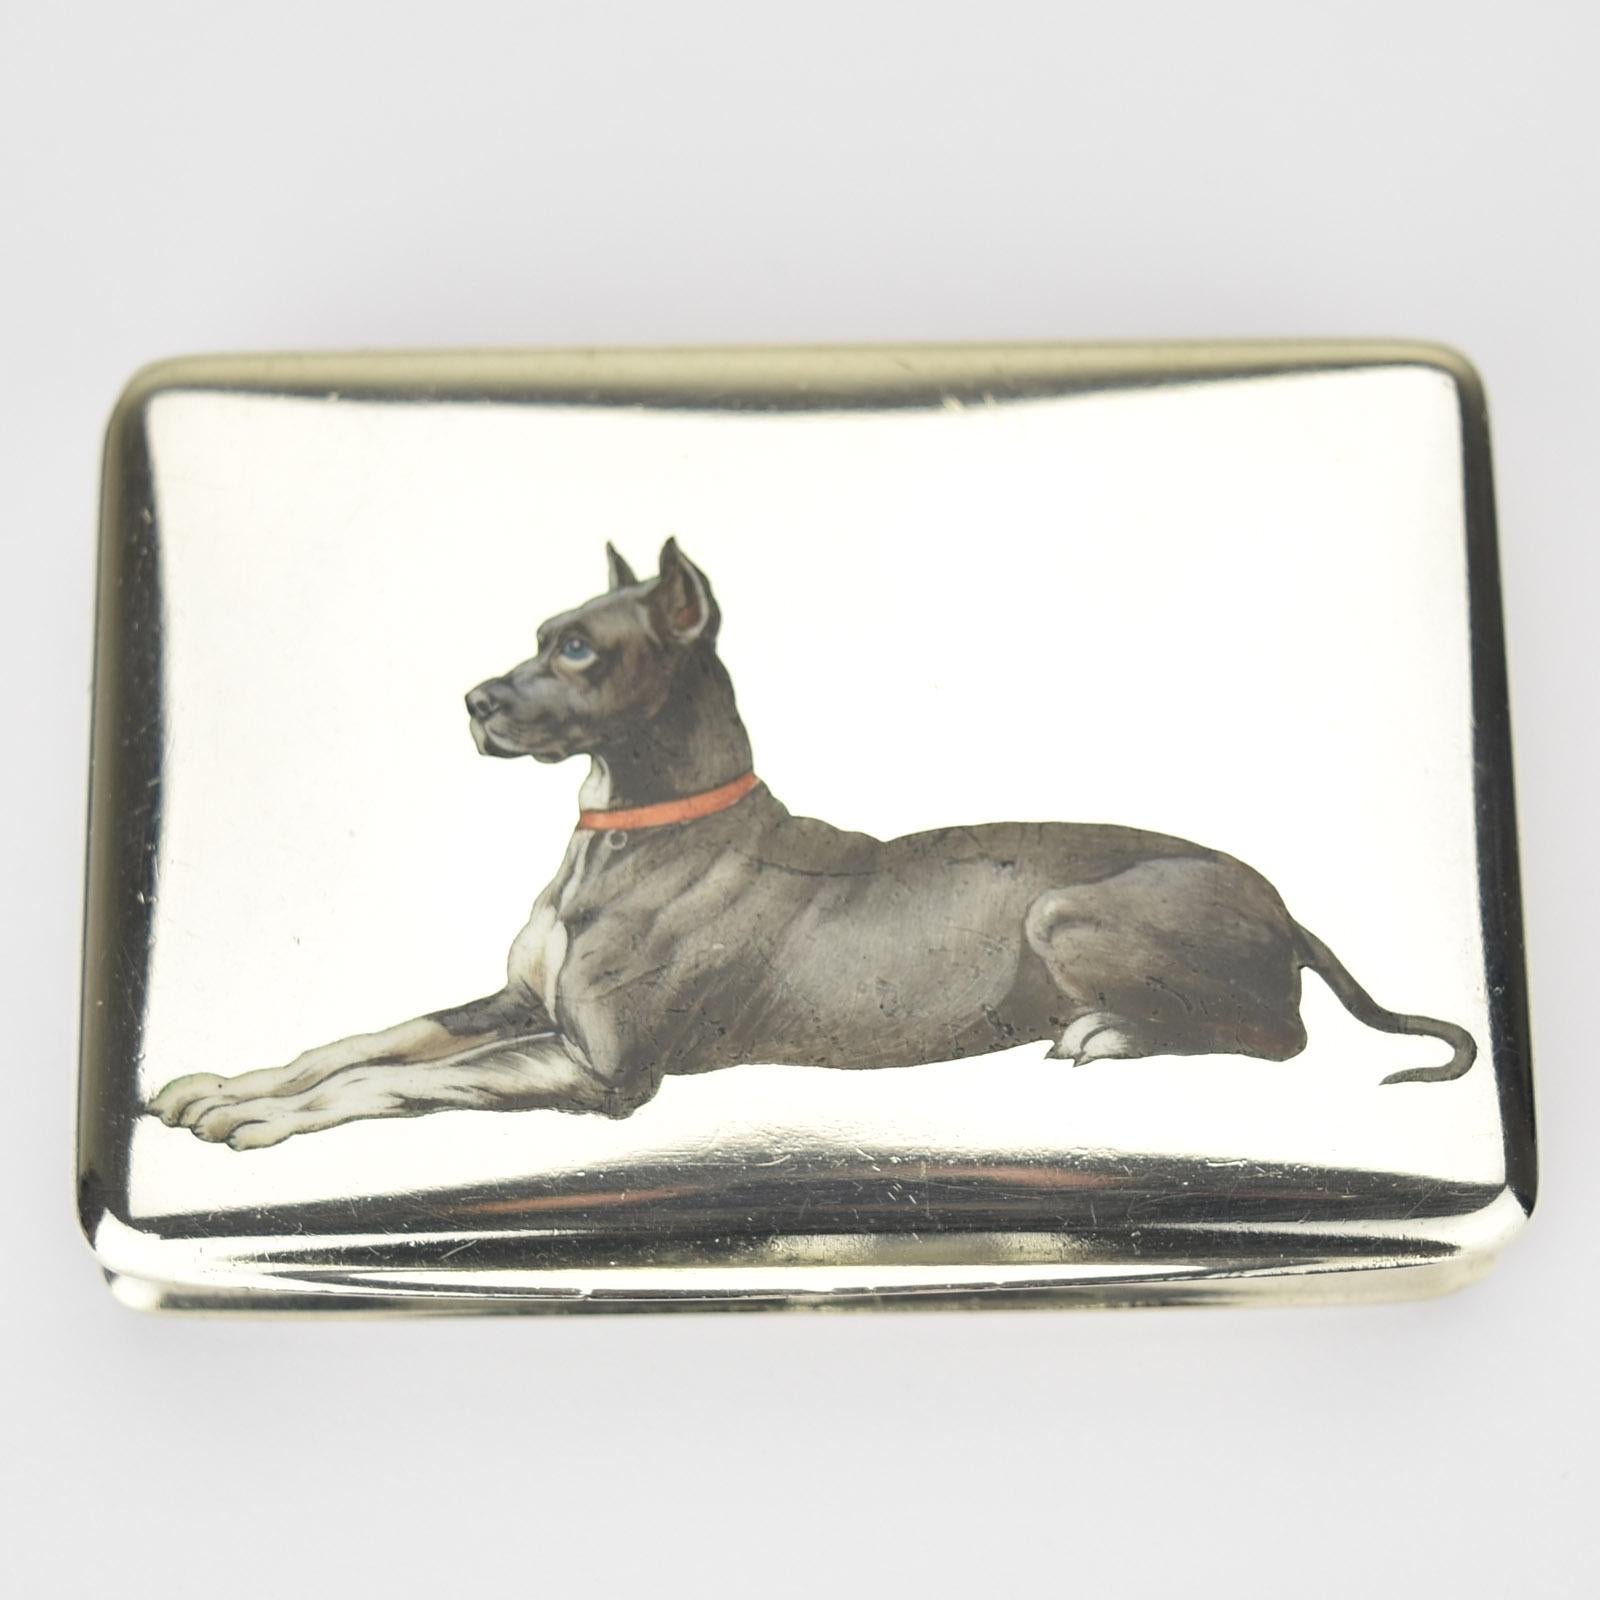 Beautiful naturalistic handpainted enameld snuff or pill box depicting a Great Dane dog, probably made around 1900 in Austria. The box is made of 0.800 silver with gilt inside.

Measurements: approx. 7,5x5x1,3cm / 2.95